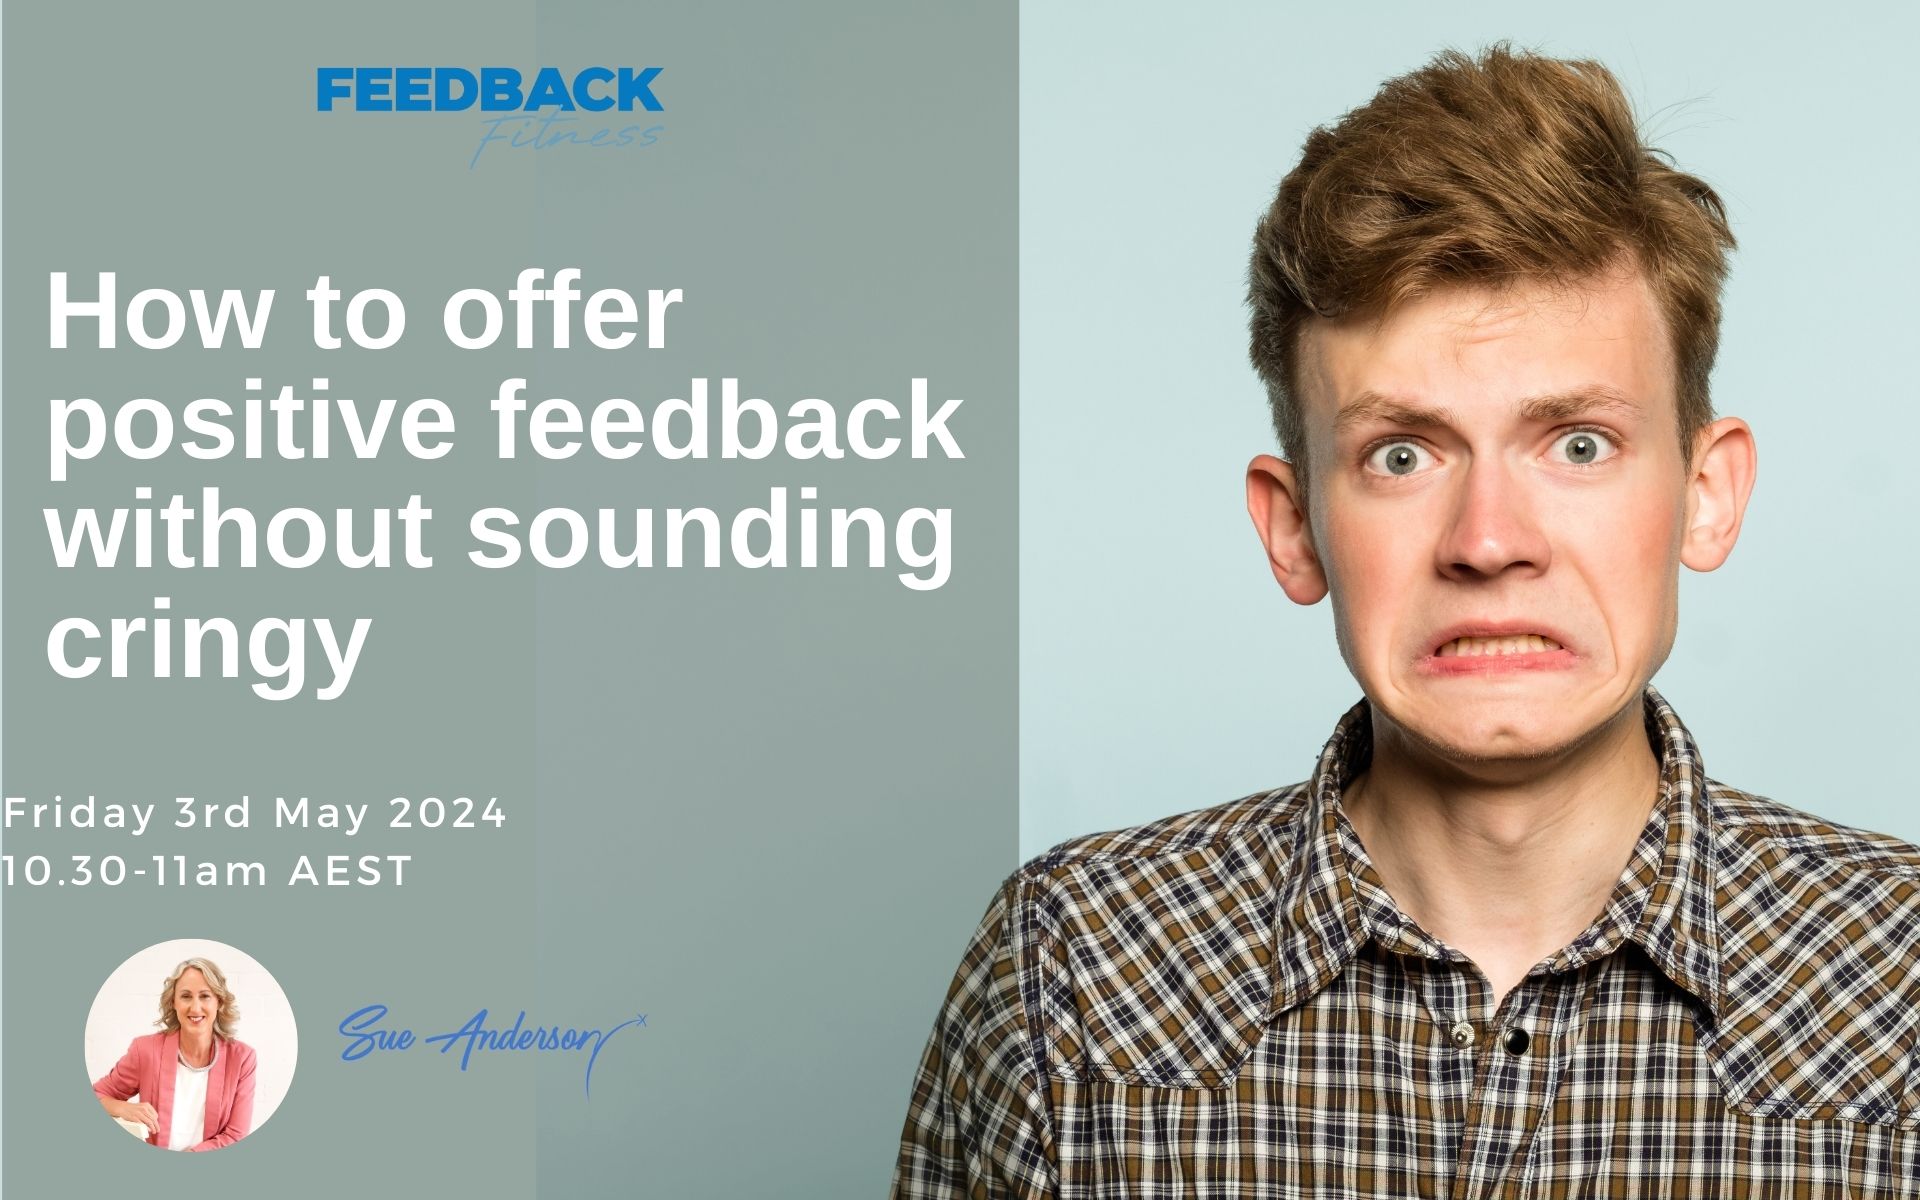 How to offer positive feedback without sounding cringy